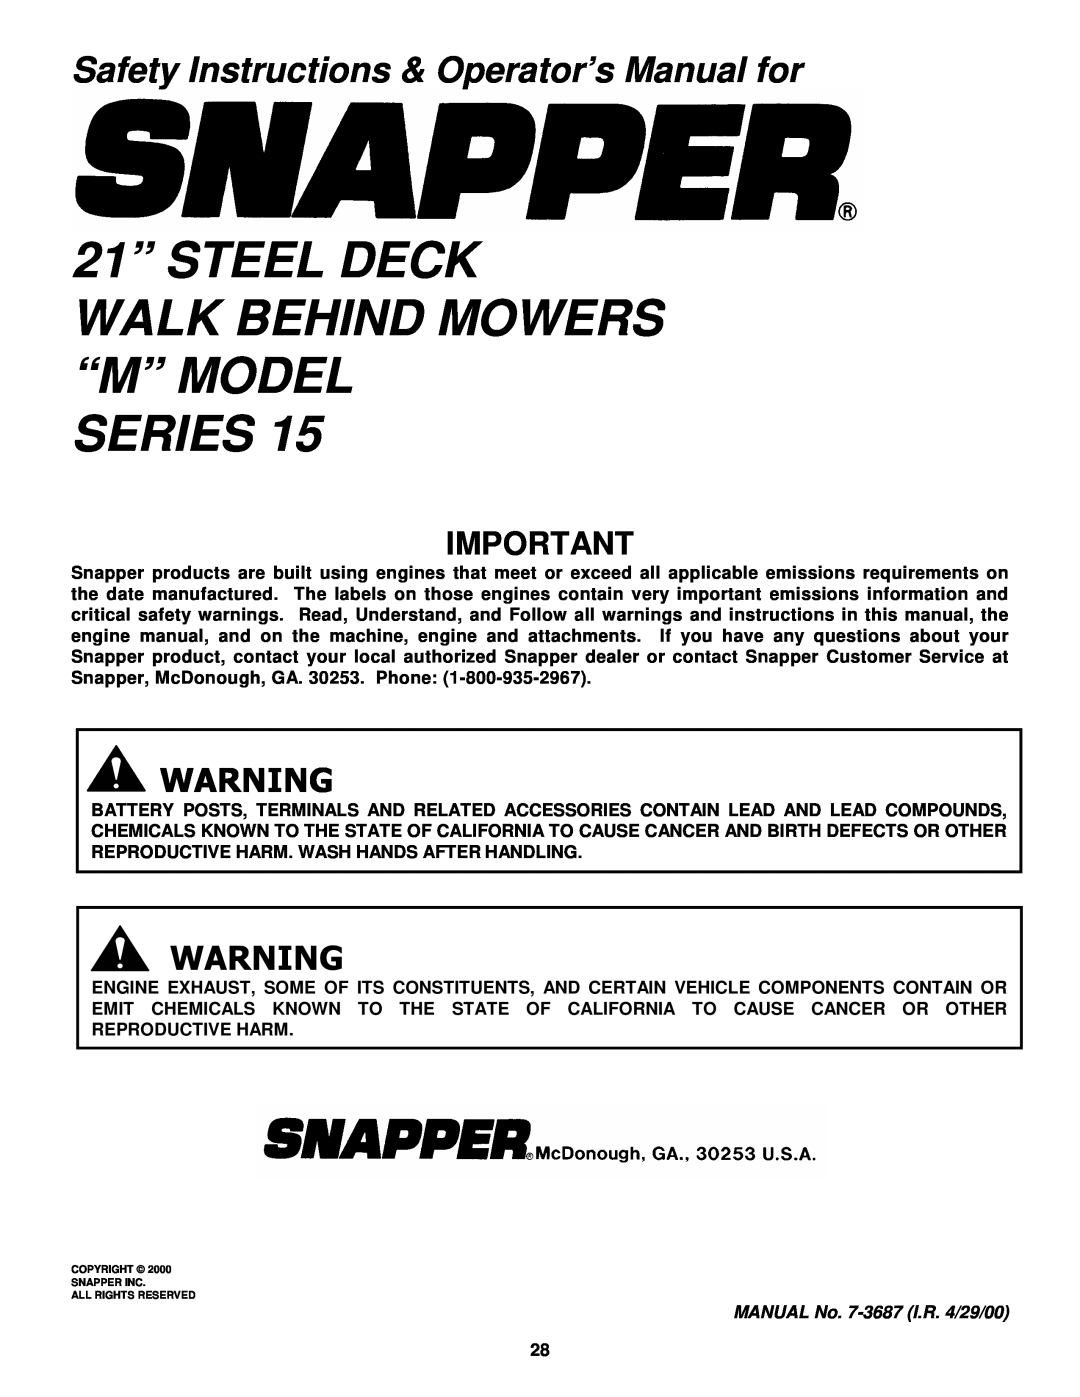 Snapper MRP216015B 21” STEEL DECK WALK BEHIND MOWERS “M” MODEL, Series, Safety Instructions & Operator’s Manual for 